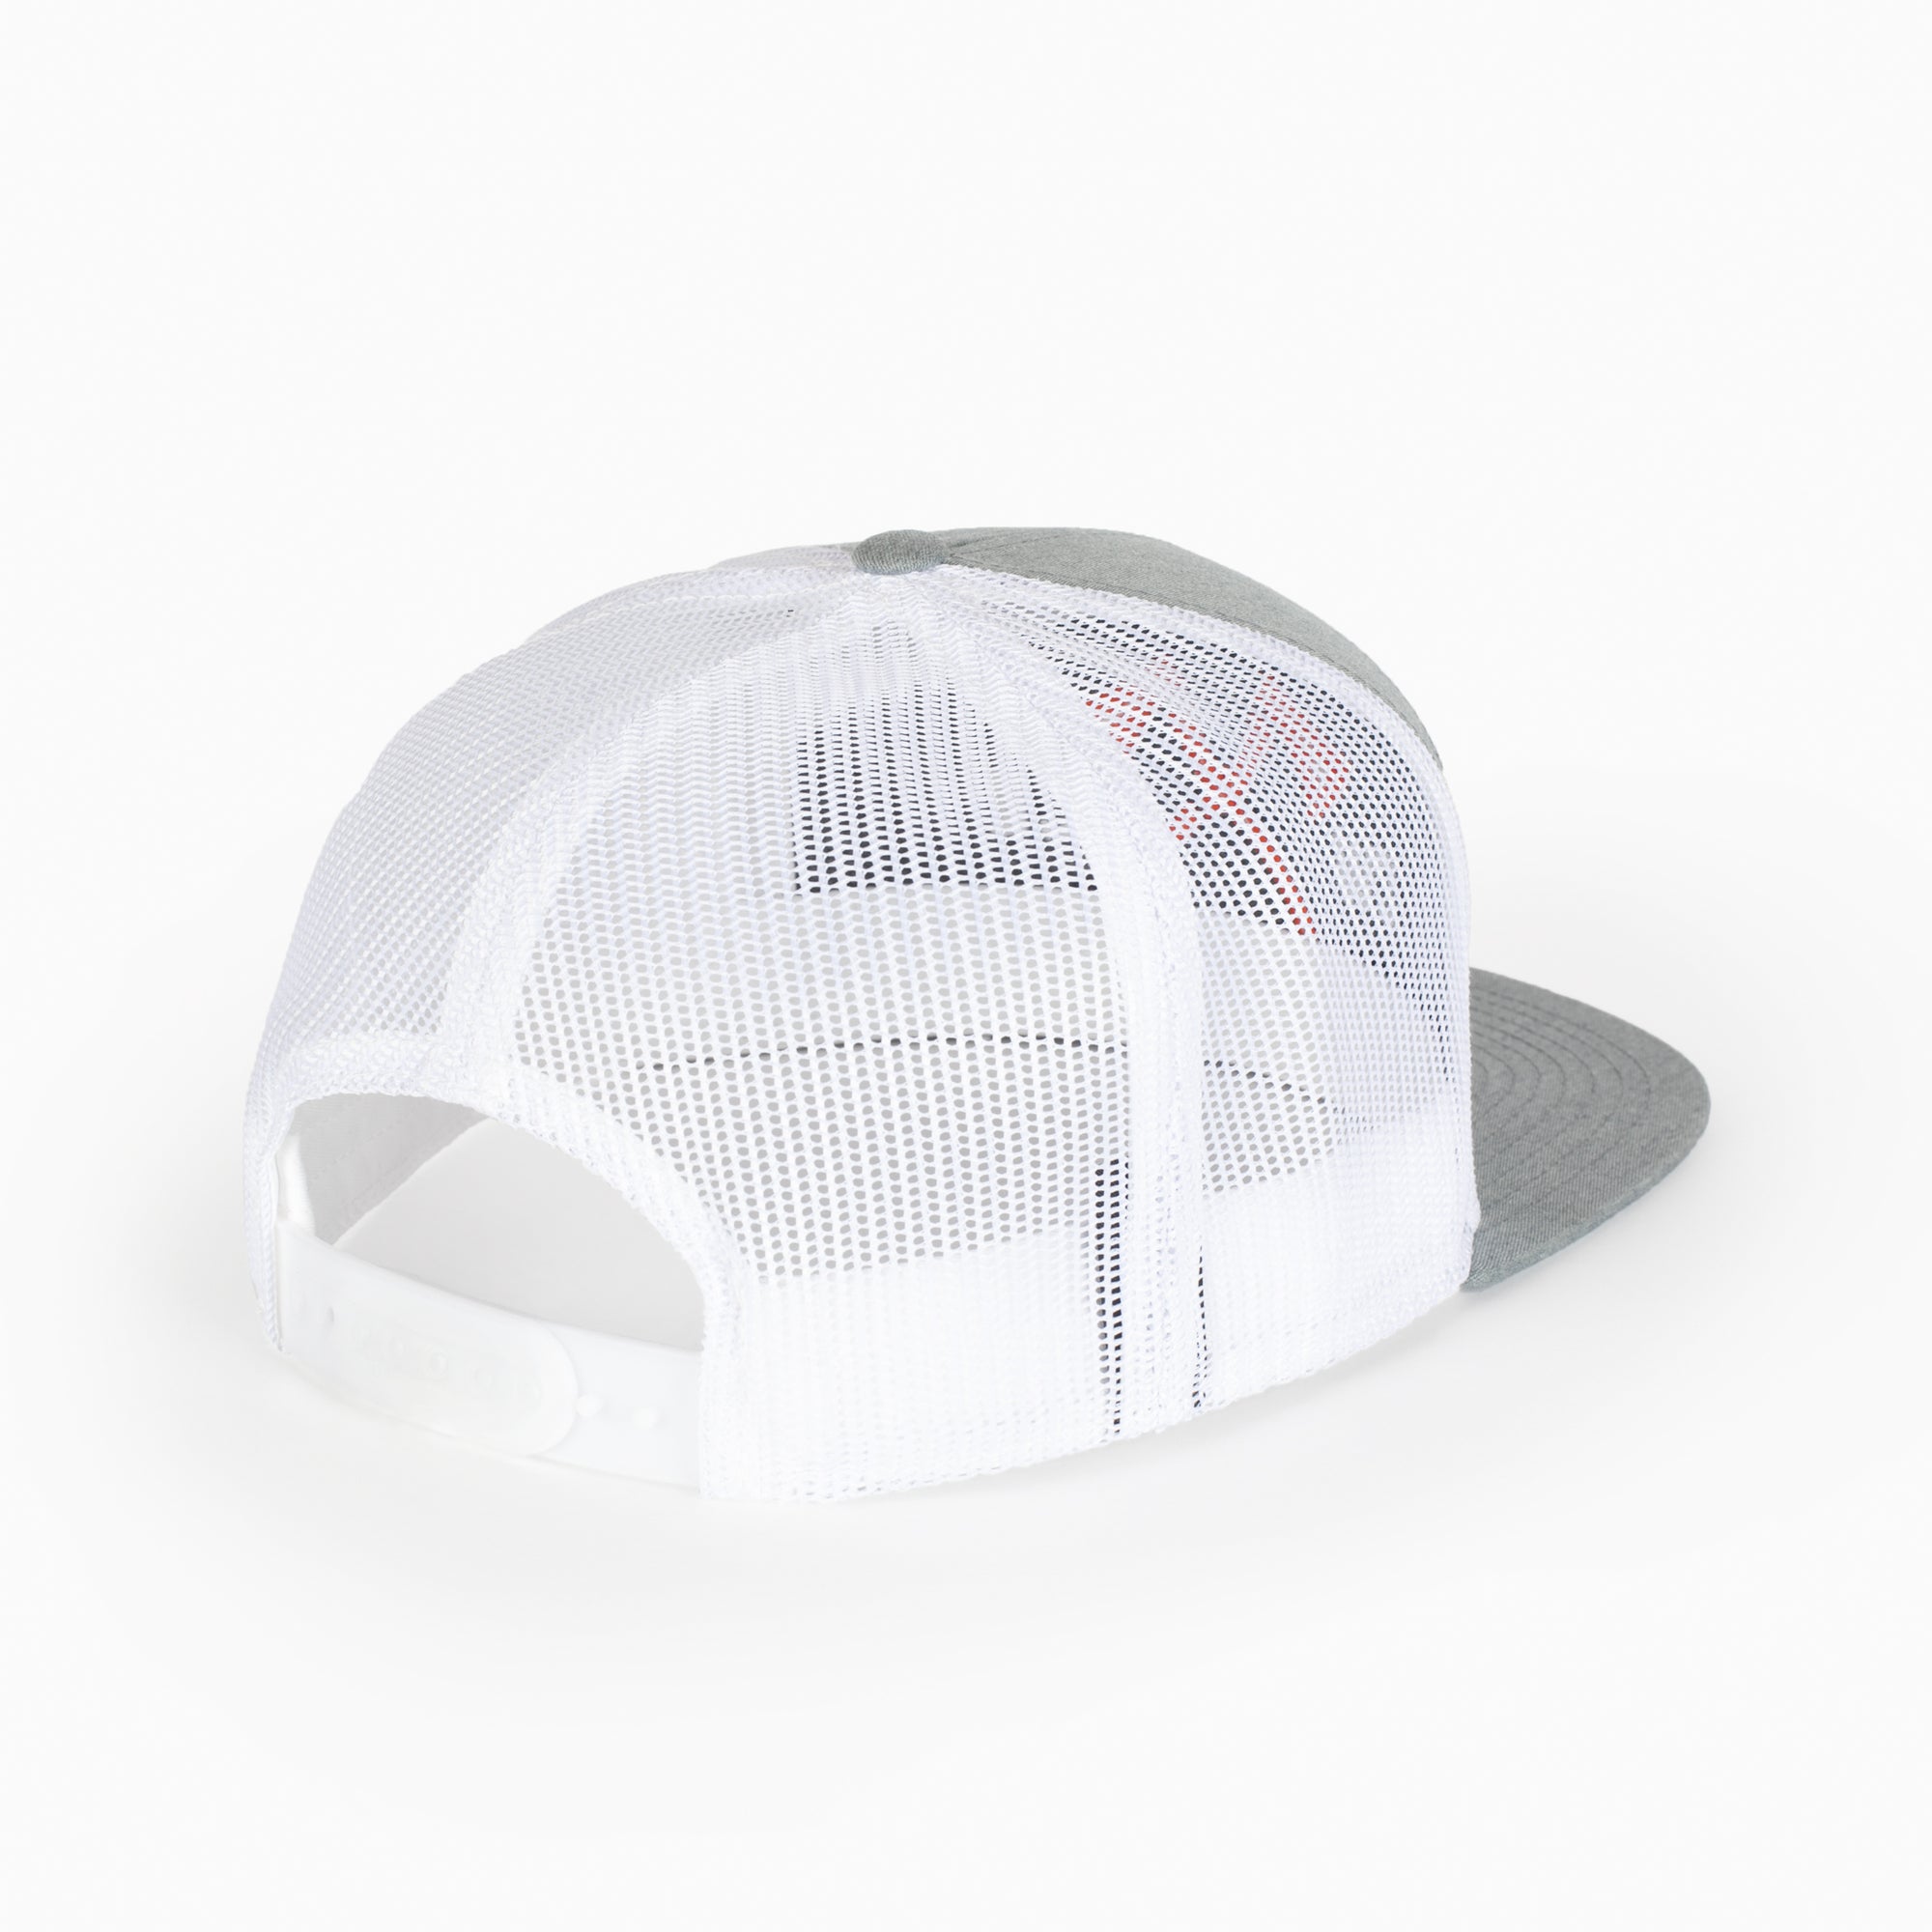 CW Hat 7 Panel 3D Embroidered Mesh